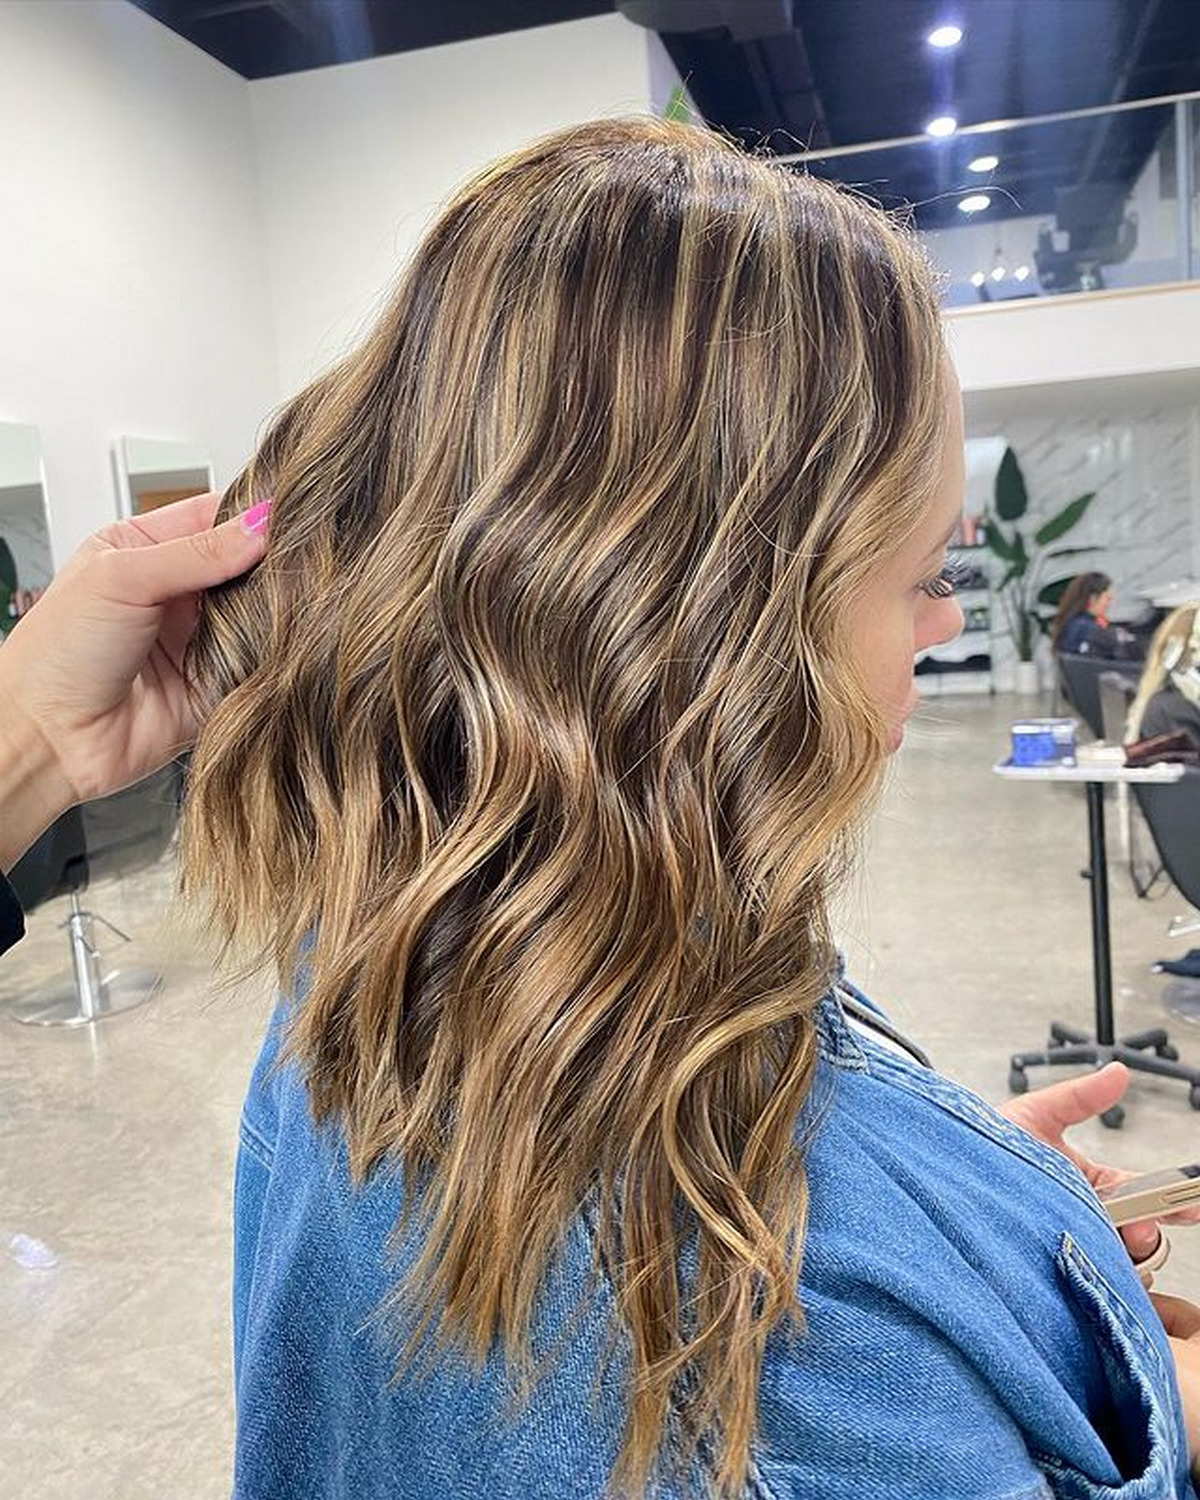 Lob Hair With Golden Blonde Highlights